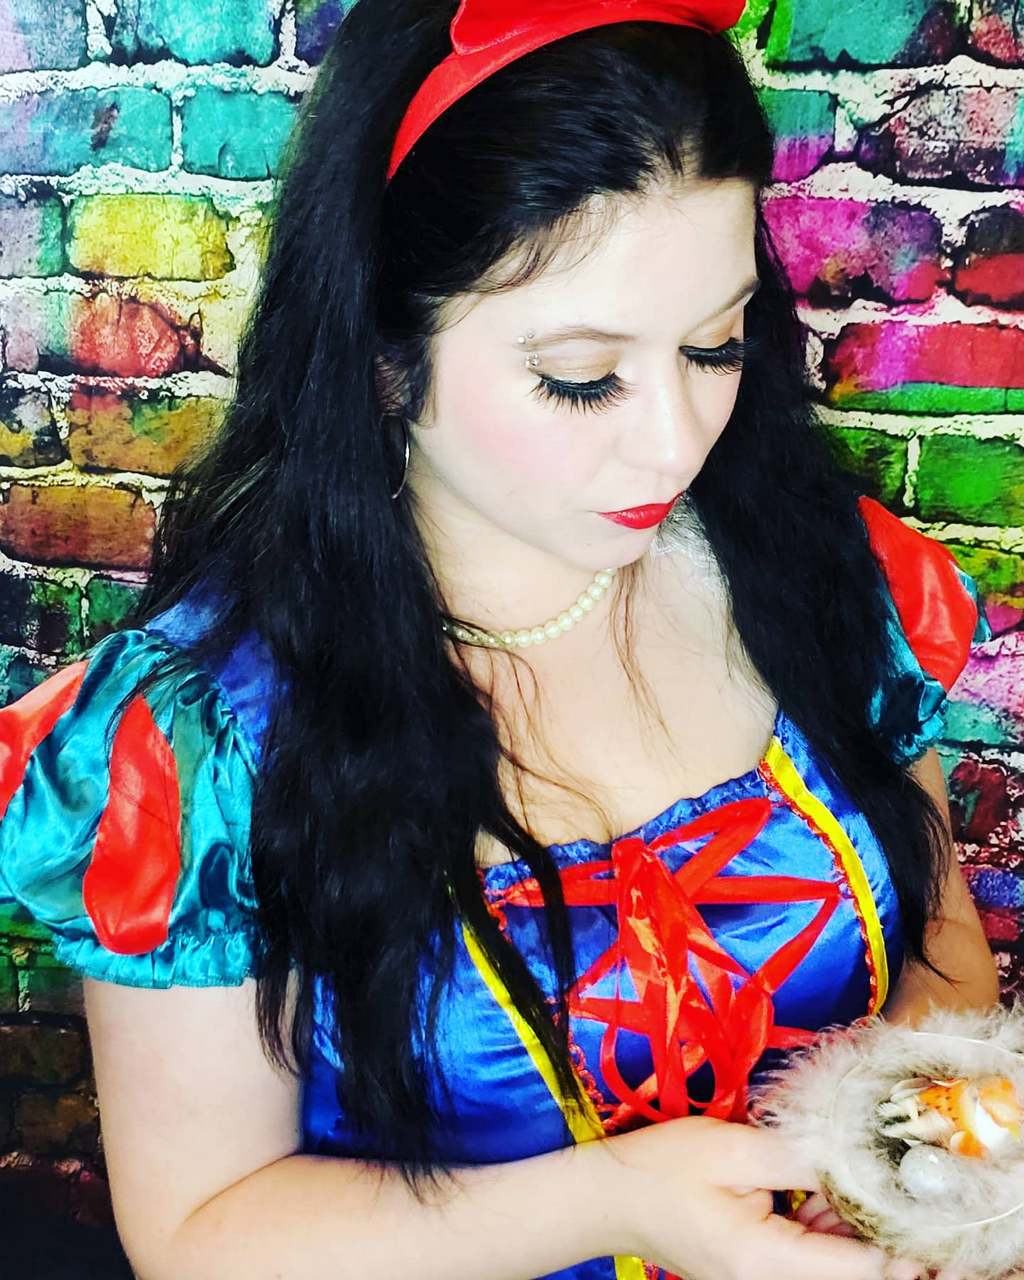 Snow White By Fayedreamr Self I Made The Pickaxe With Foam Clay And Pvc